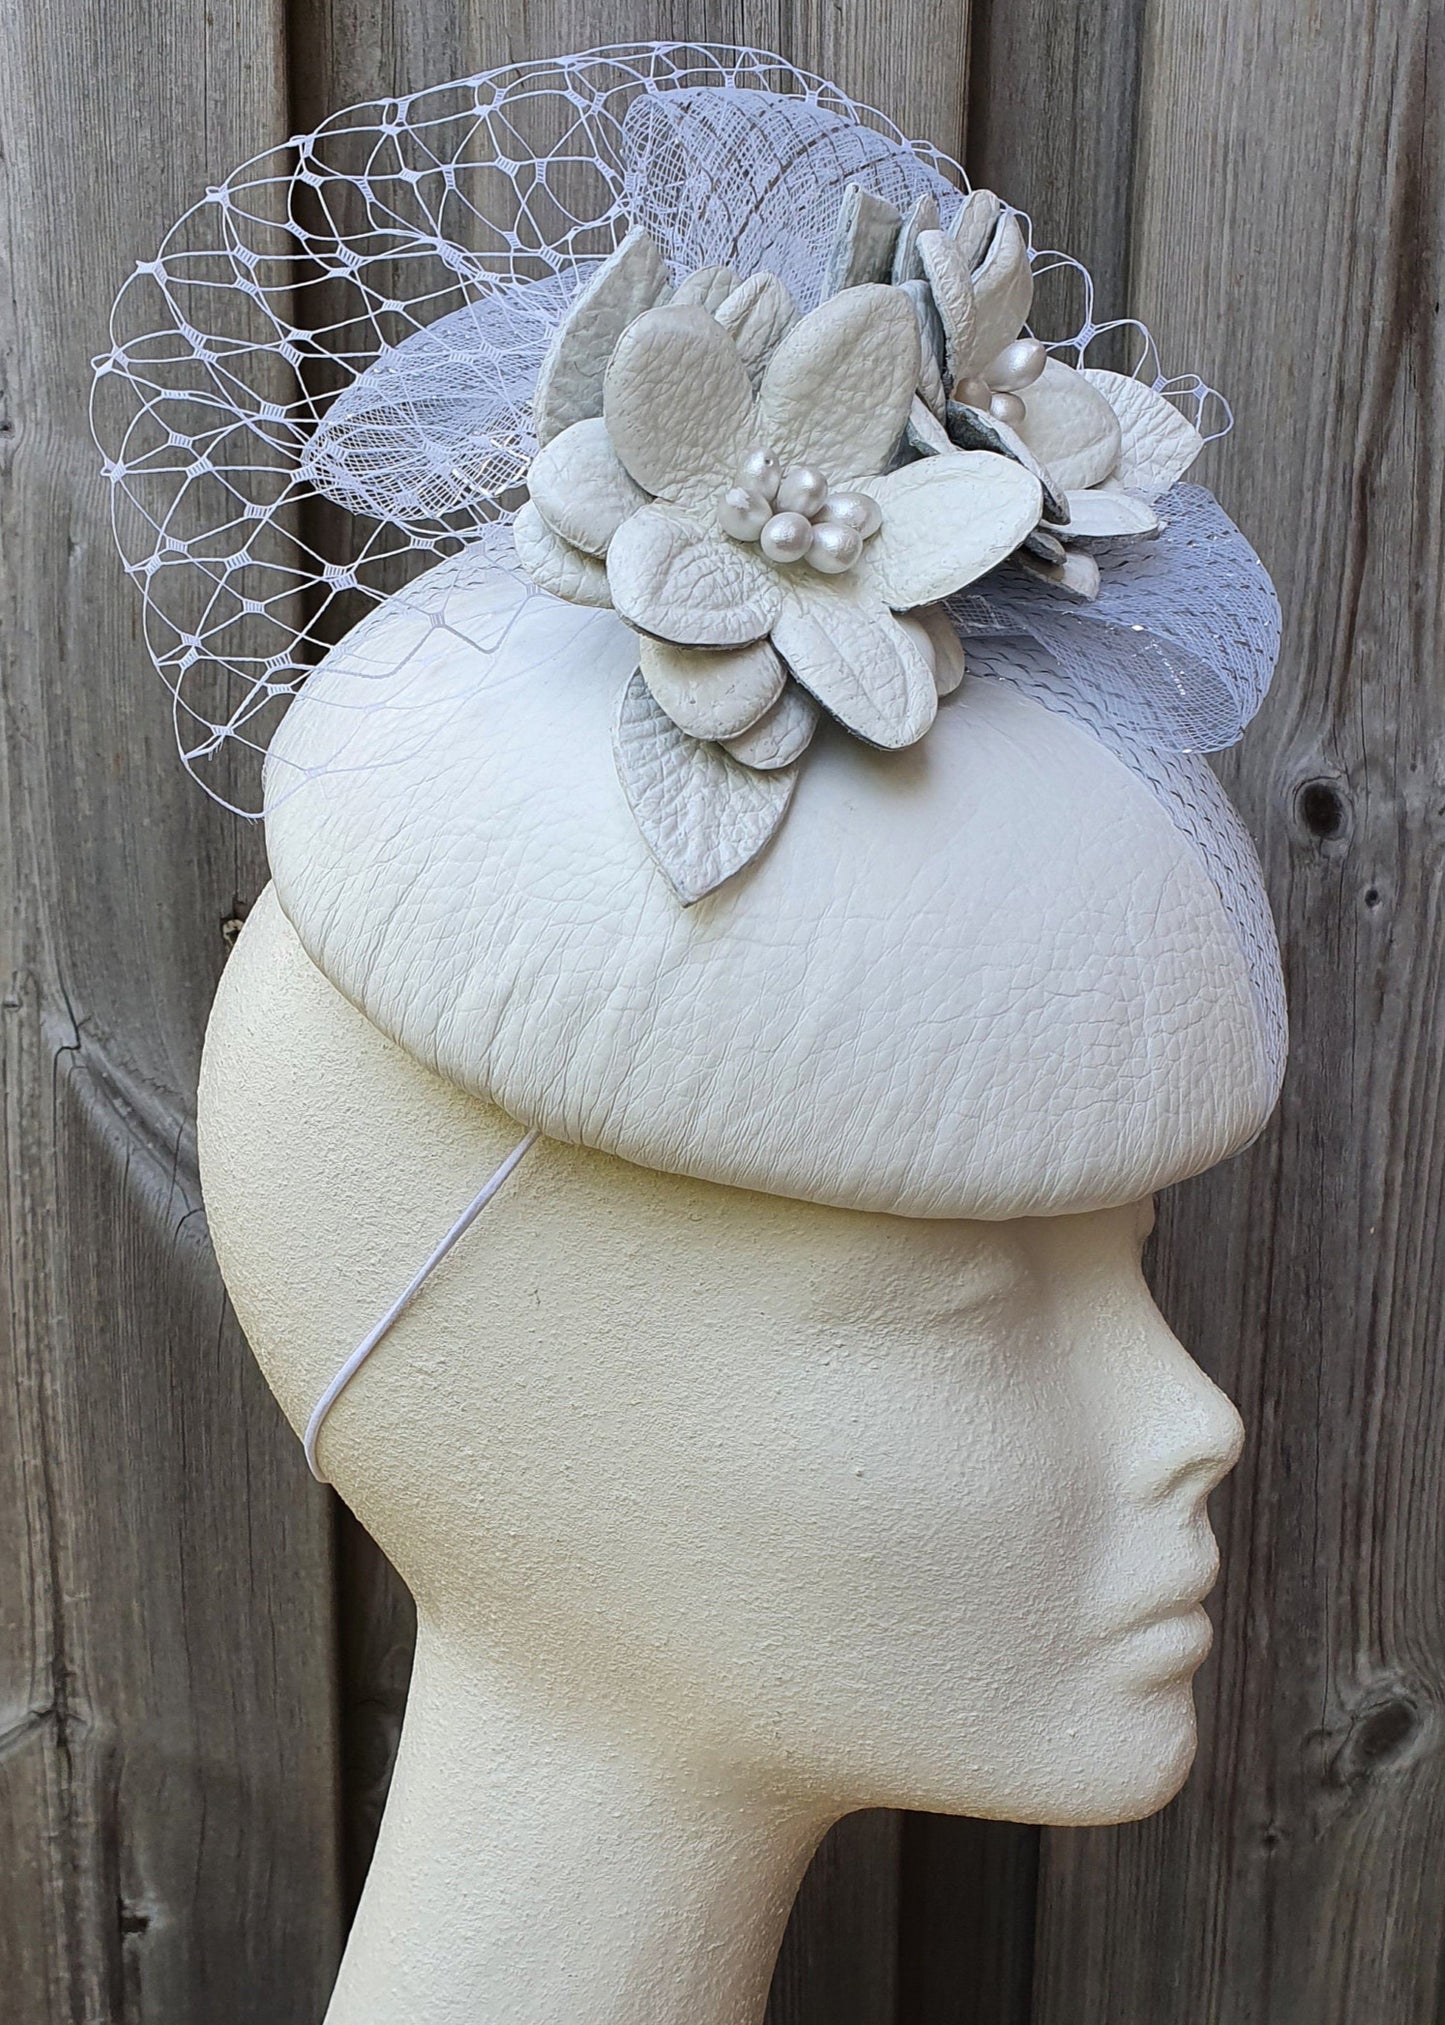 Round handmade fascinator white with natural leather and crinoline, wedding headdress, elegant ladies hat for special occasion